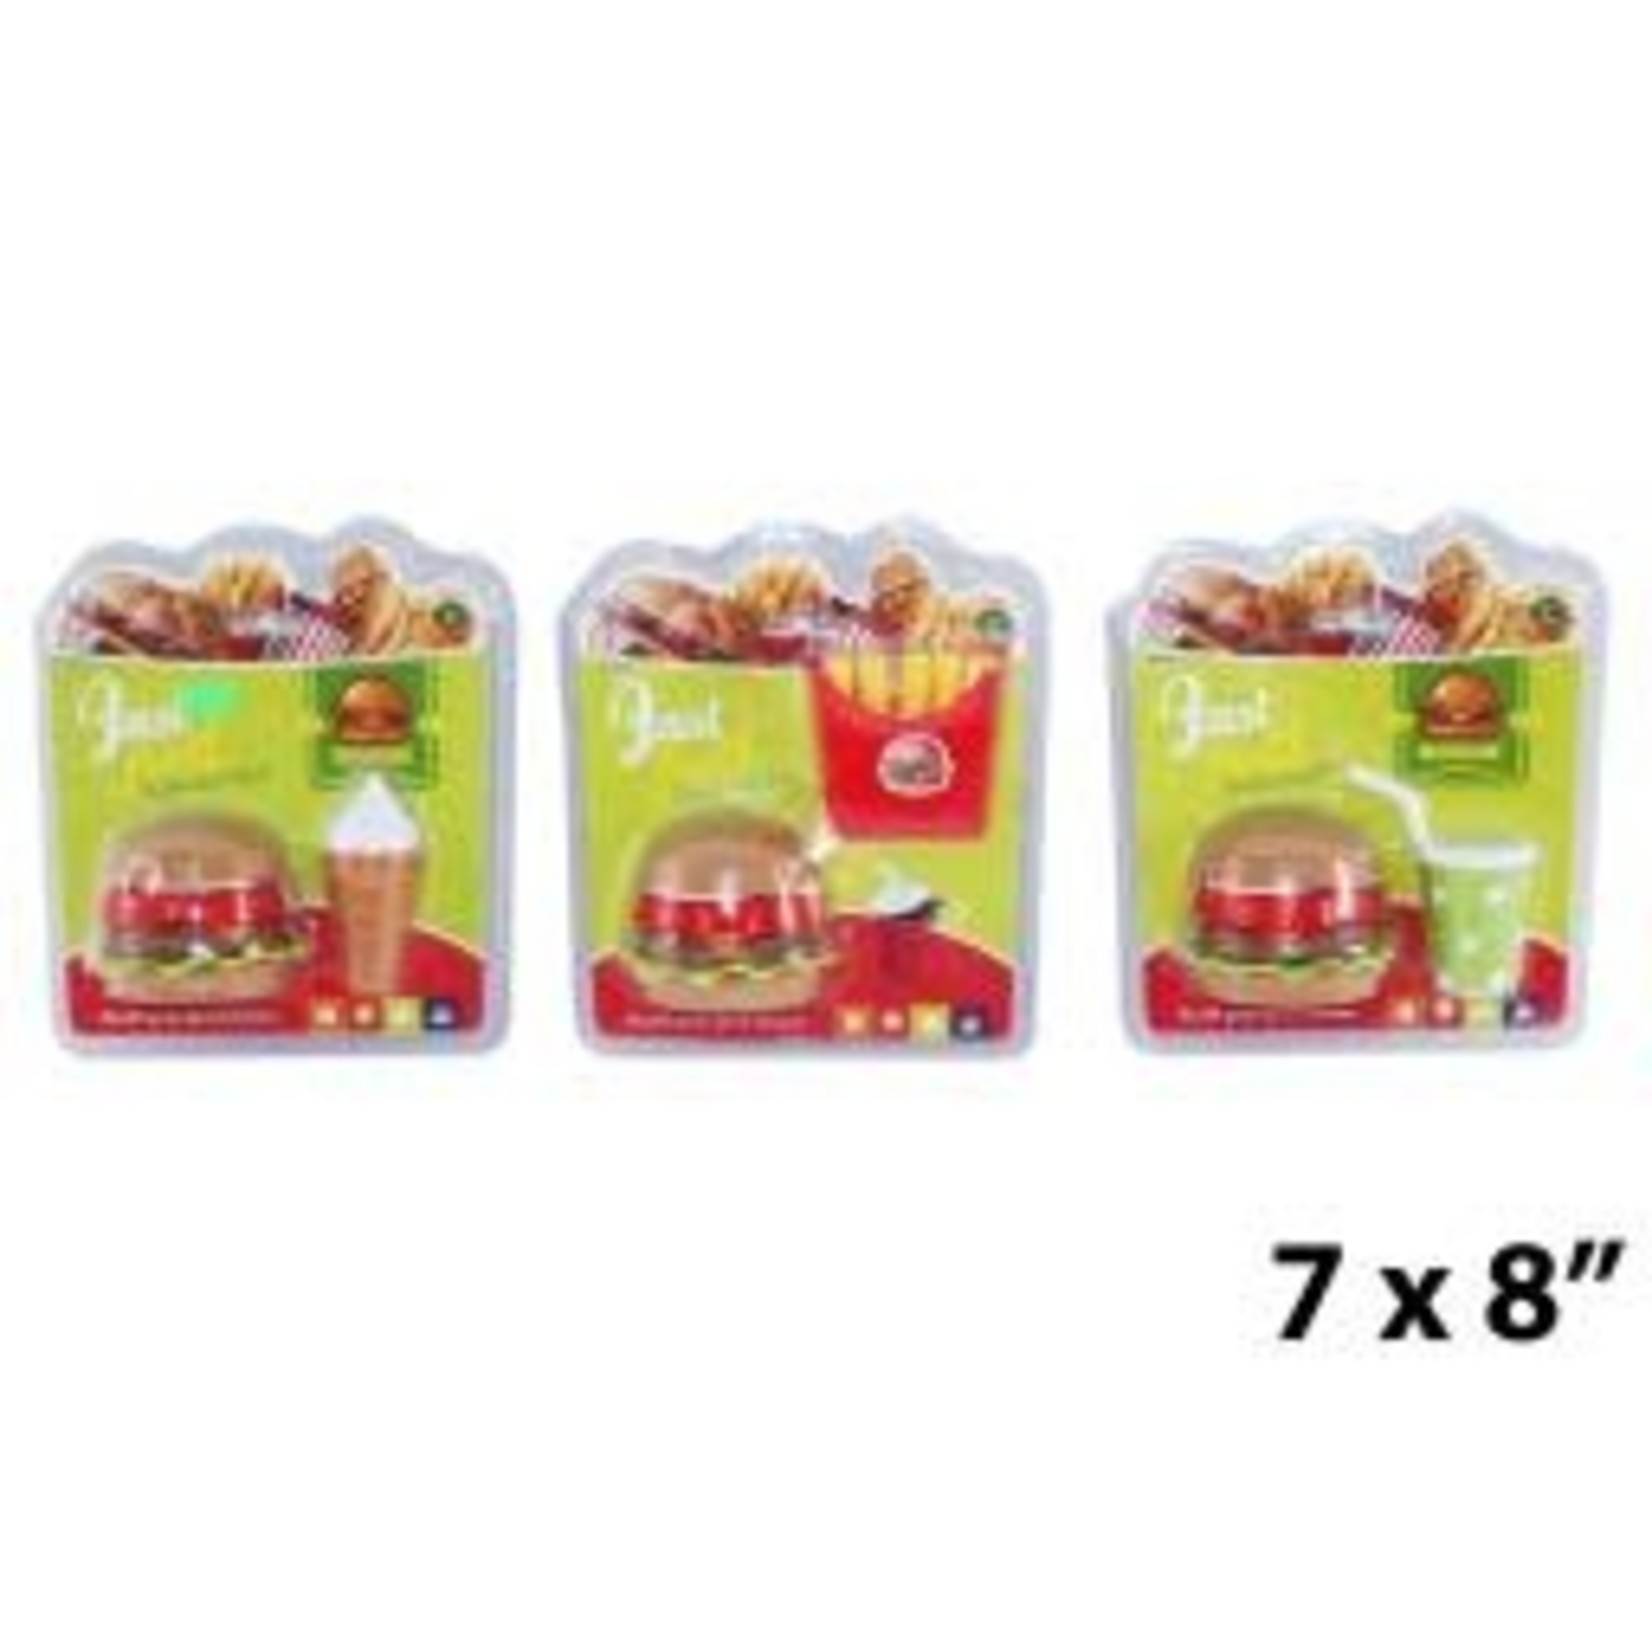 FAST FOOD BURGER AND FRY PLAYSET